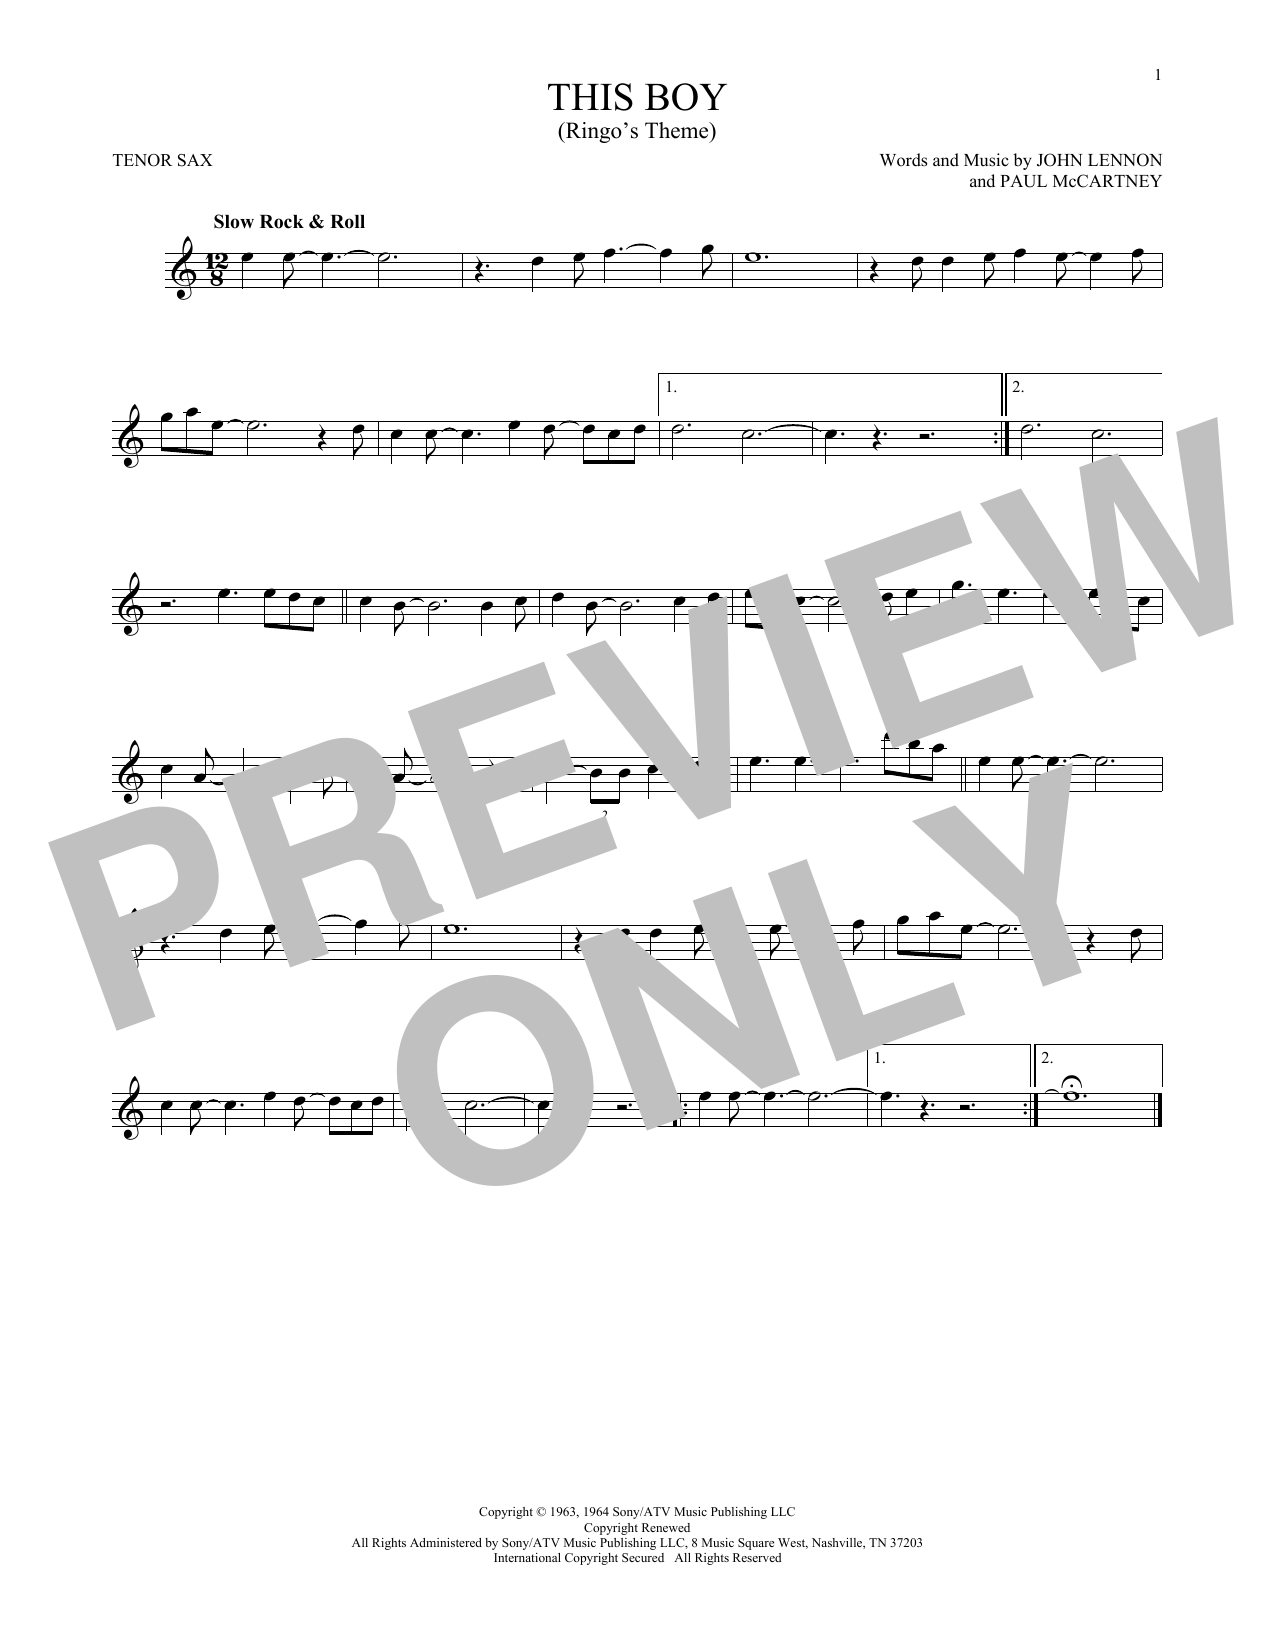 Download The Beatles This Boy (Ringo's Theme) Sheet Music